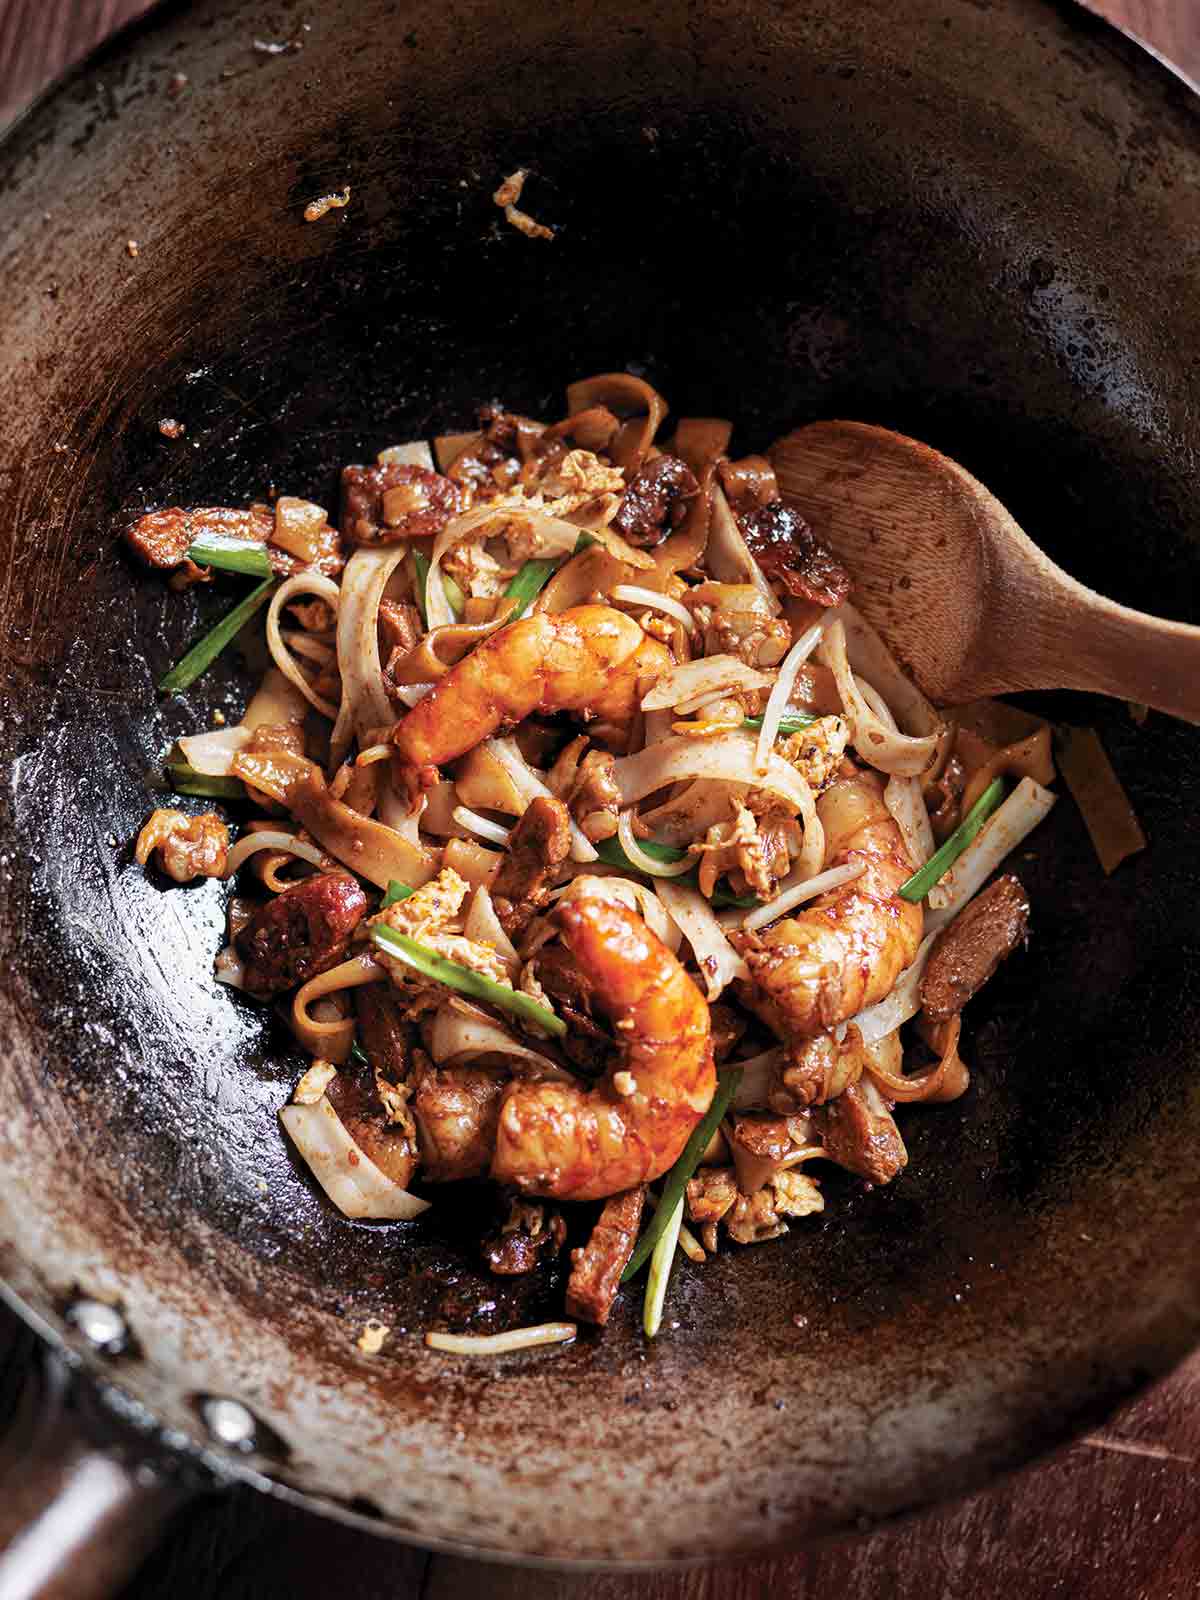 A metal wok with a serving of char kway teow and a wooden spoon resting inside.